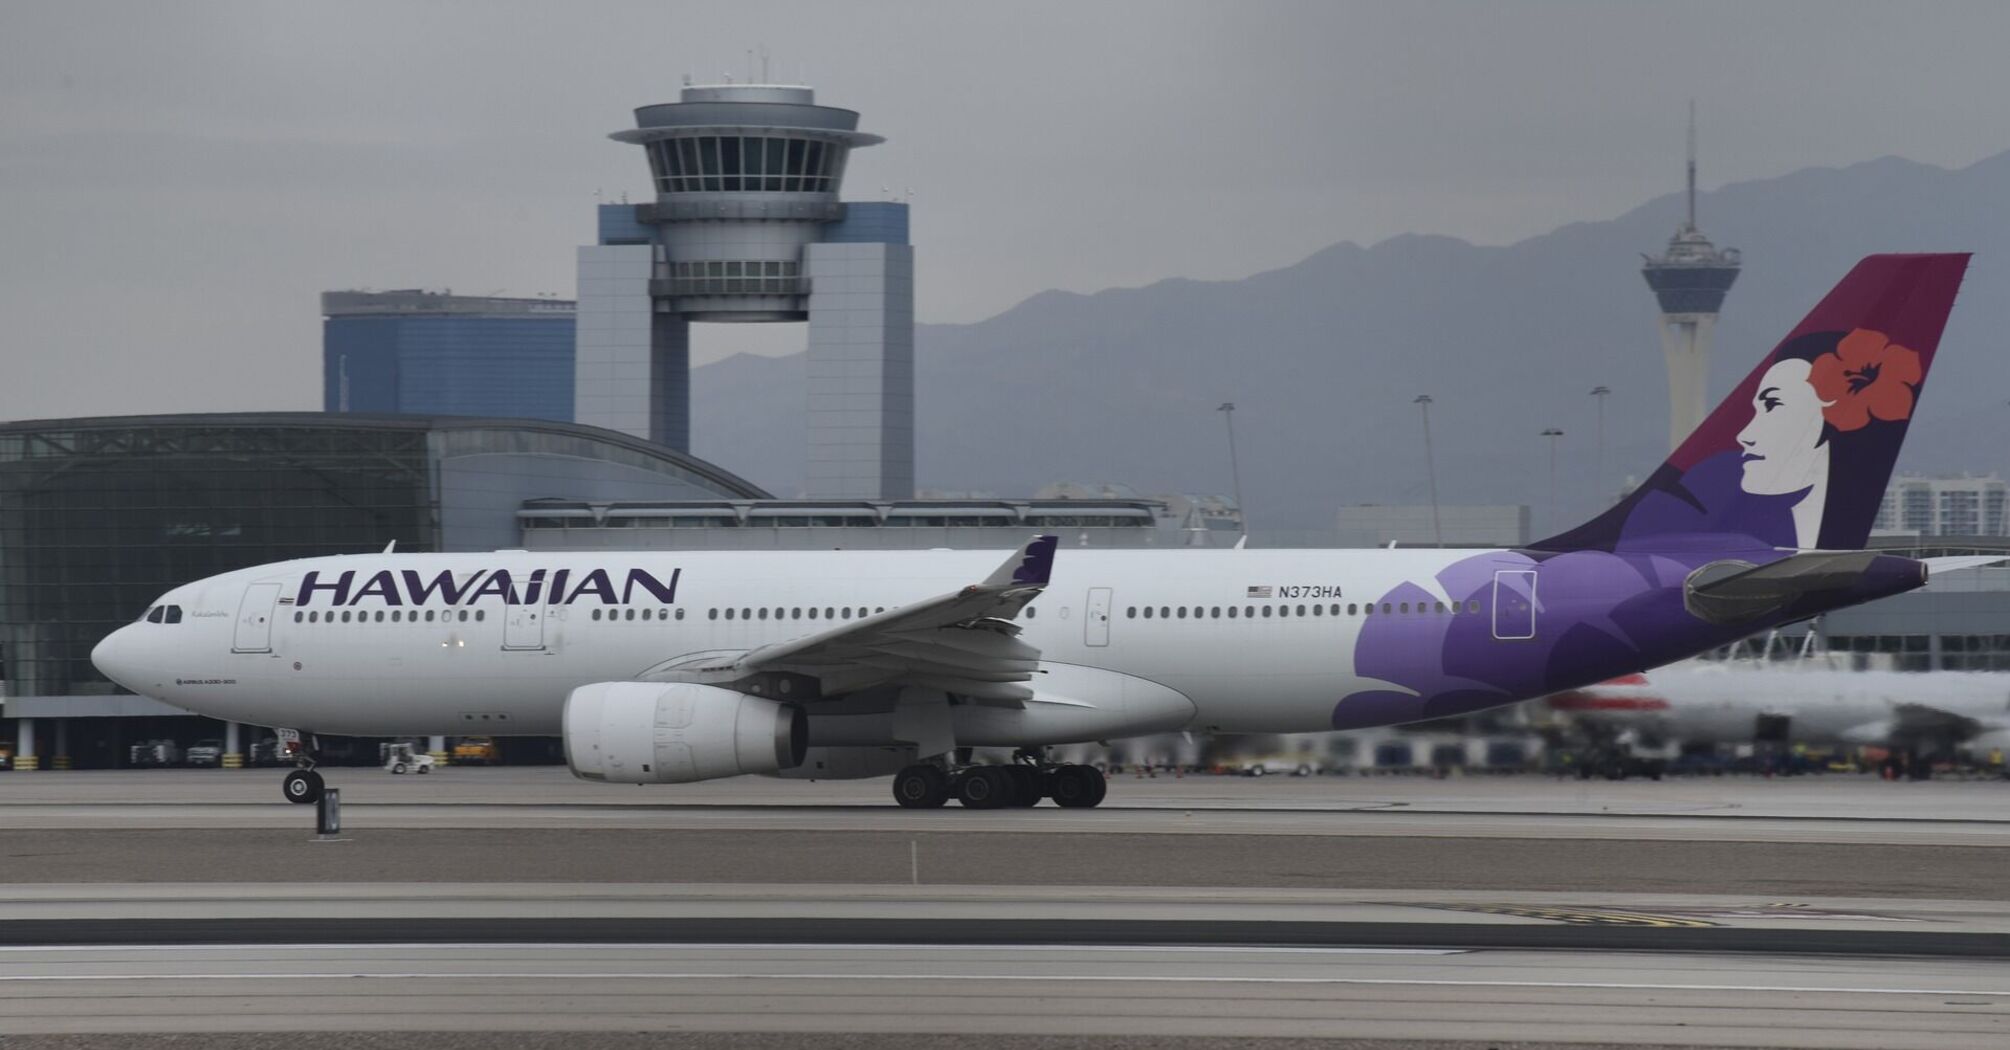 Hawaiian Airlines will use Starlink on some of its flights